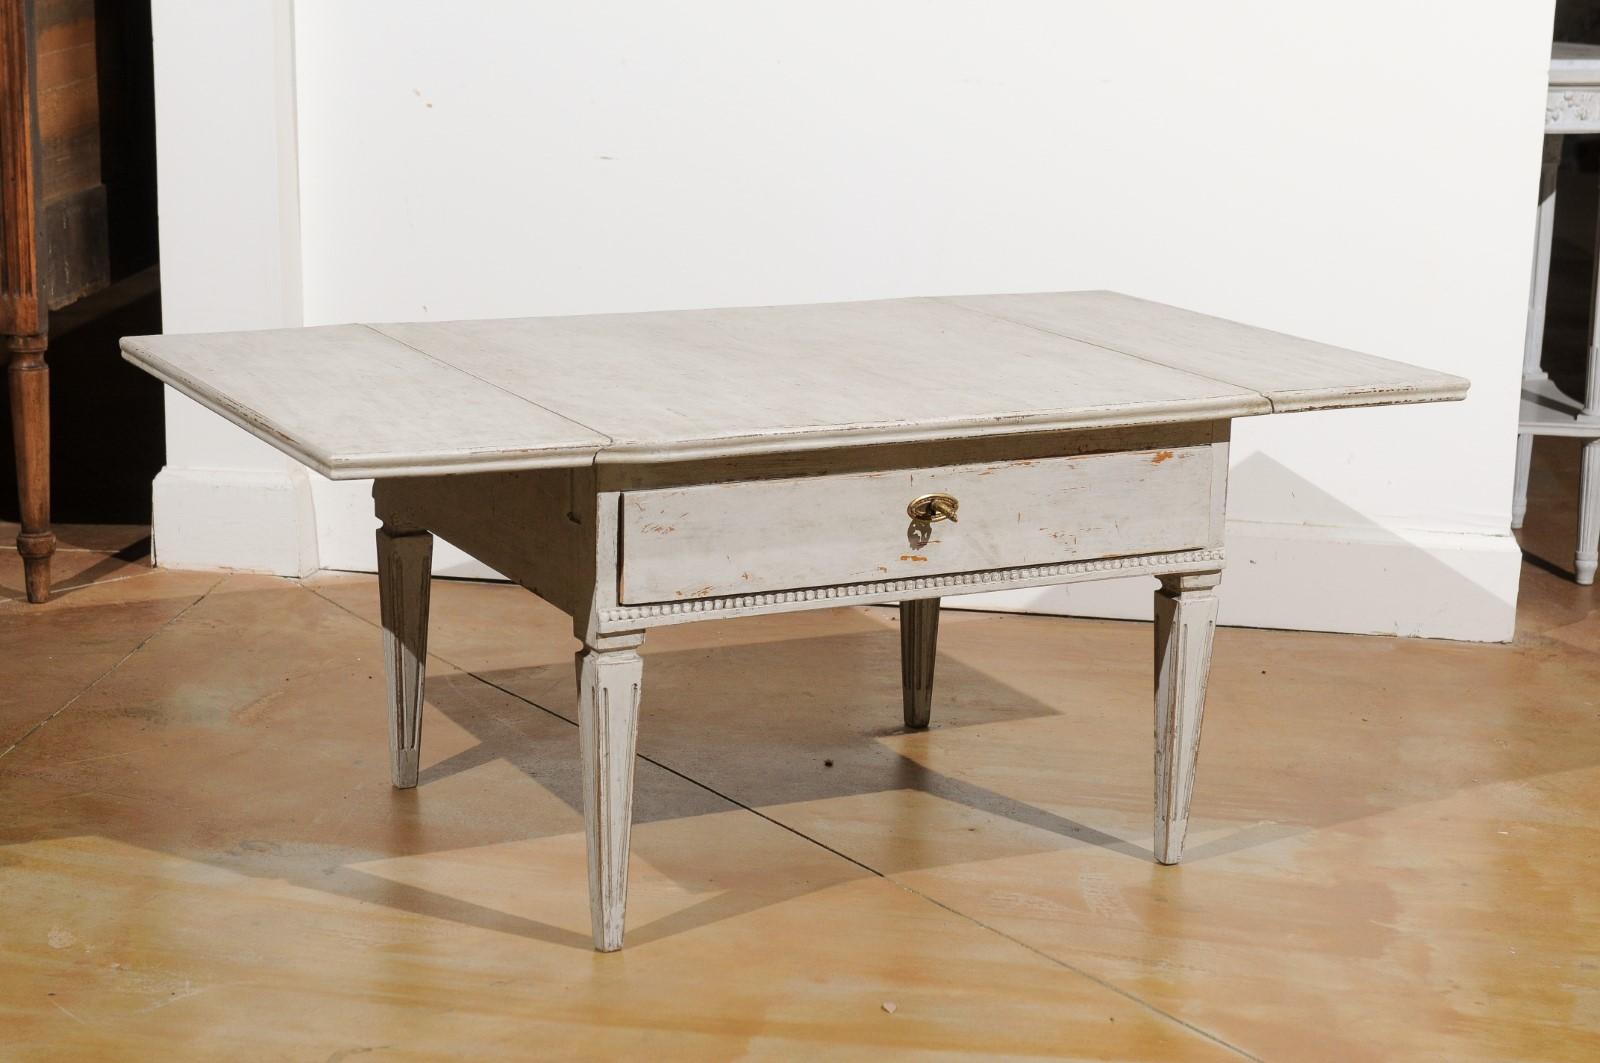 A Swedish Gustavian style painted coffee table from the 20th century, with drop leaves, single drawer and tapered legs. Created in Sweden during the 20th century, this Gustavian style coffee table features a rectangular top flanked with drop leaves,